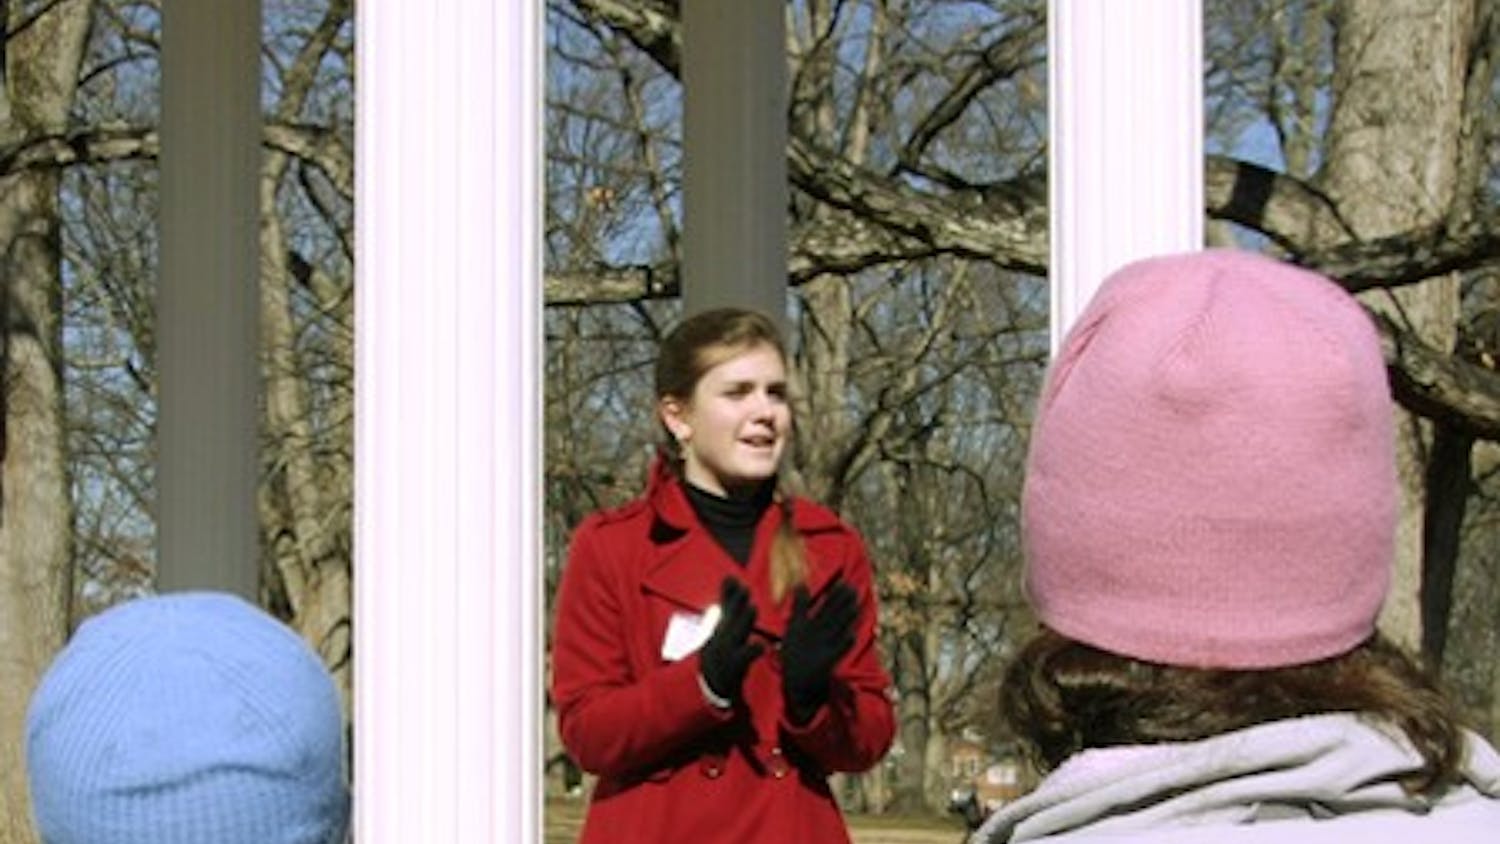 Ellen Porter, a freshman business major, leads a tour of the campus for prospective students. DTH/ Erica O’Brien